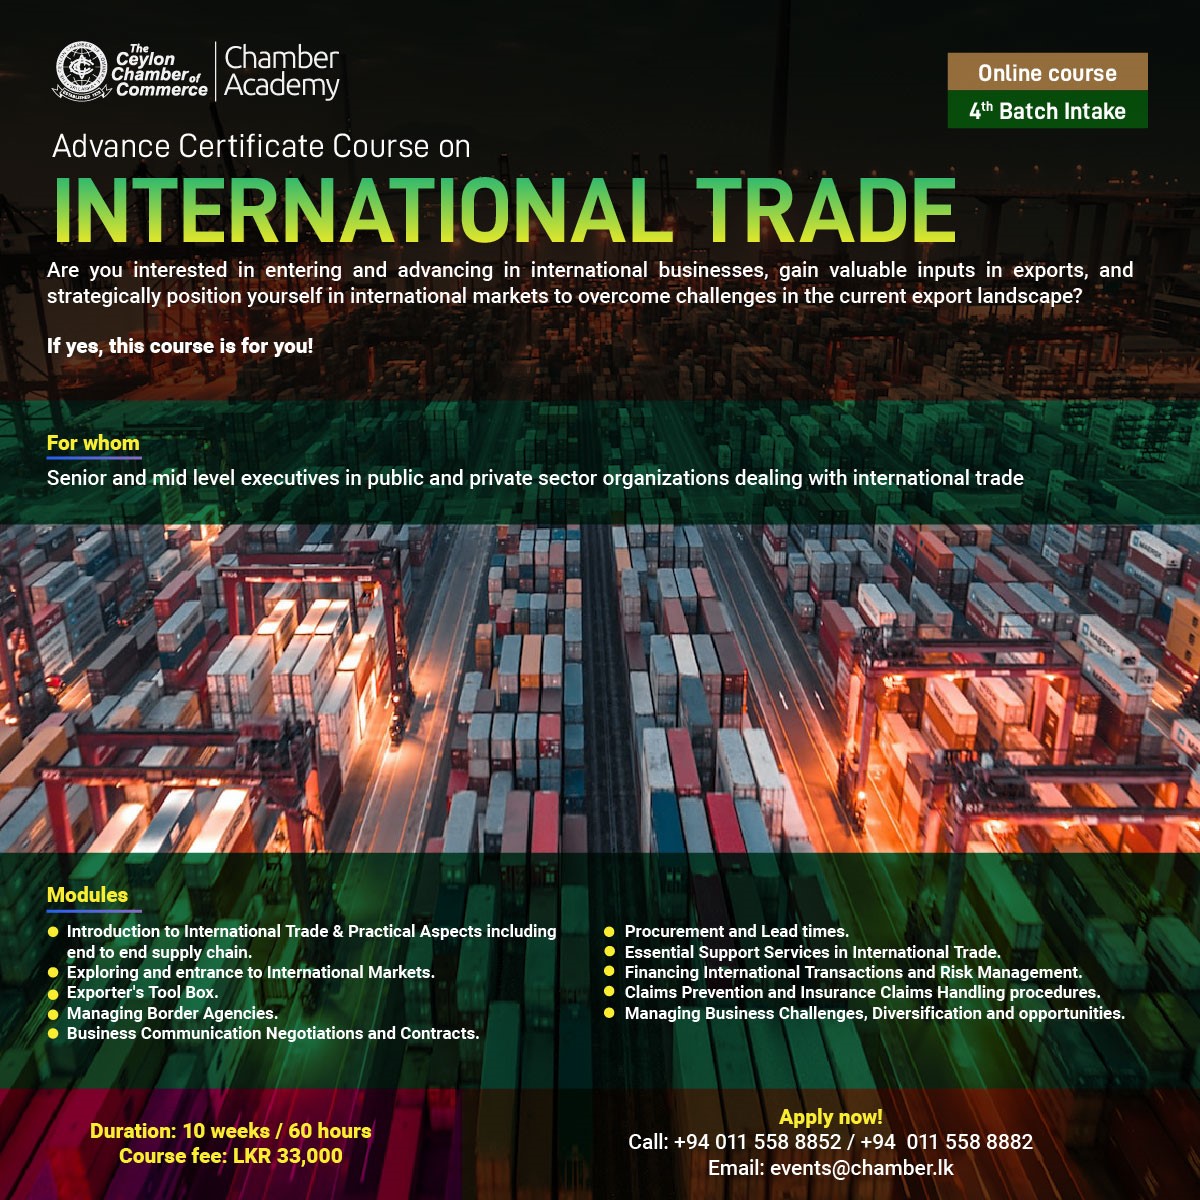 Advanced Certificate Course on International Trade